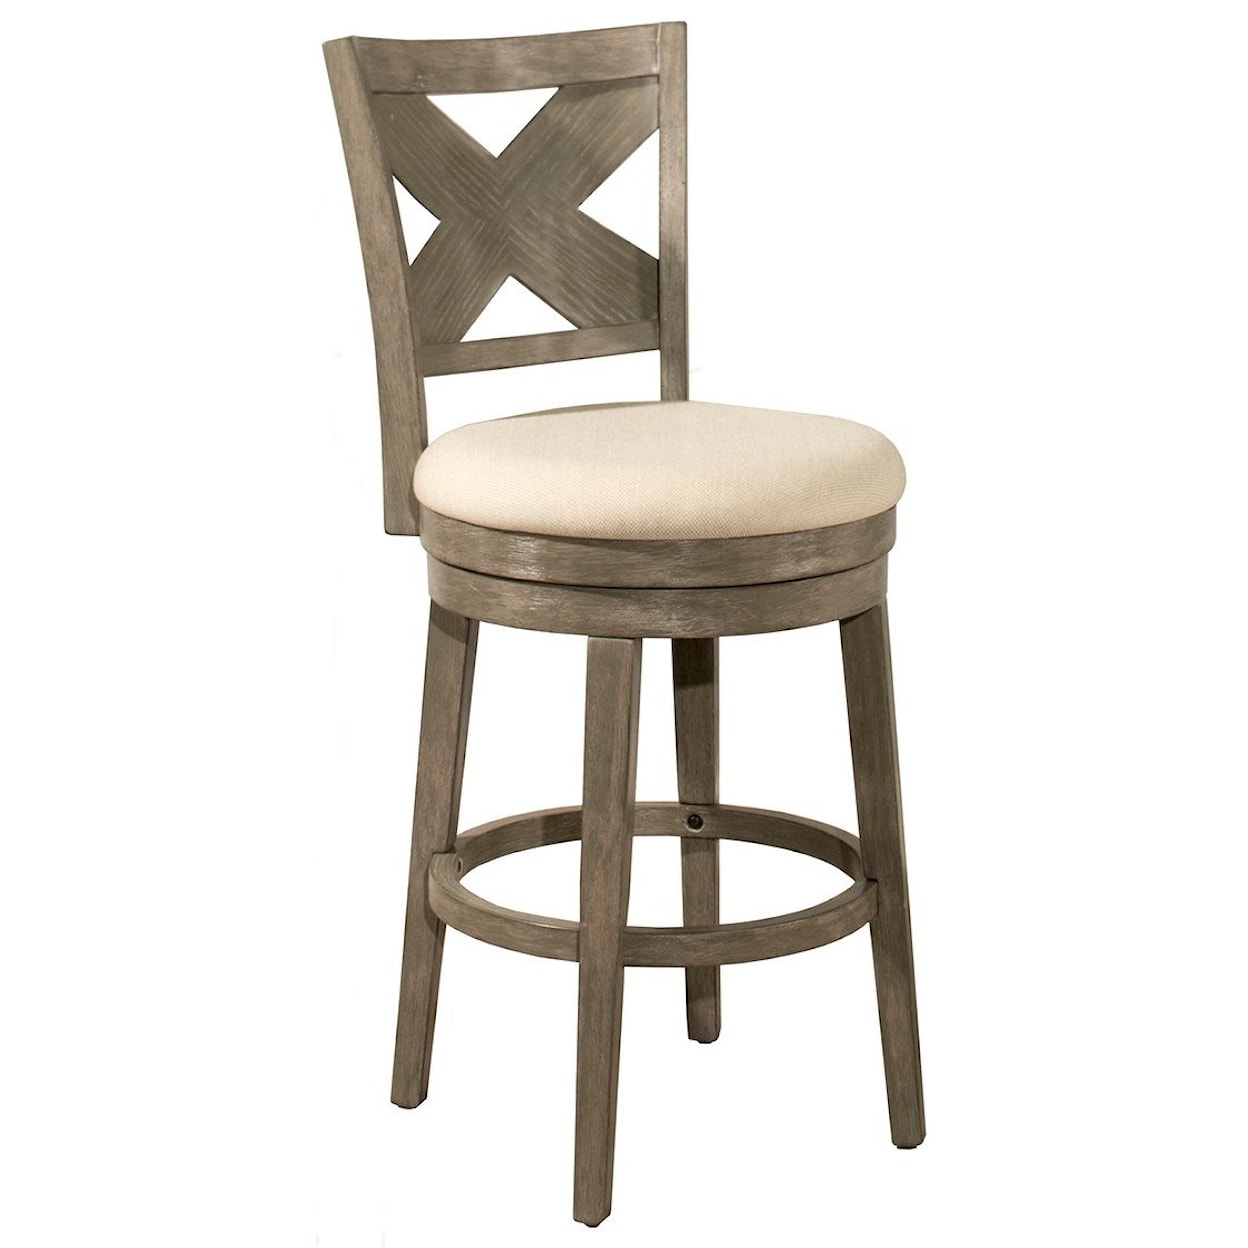 Hillsdale Wood Stools 26" Counter Height Swivel Stool